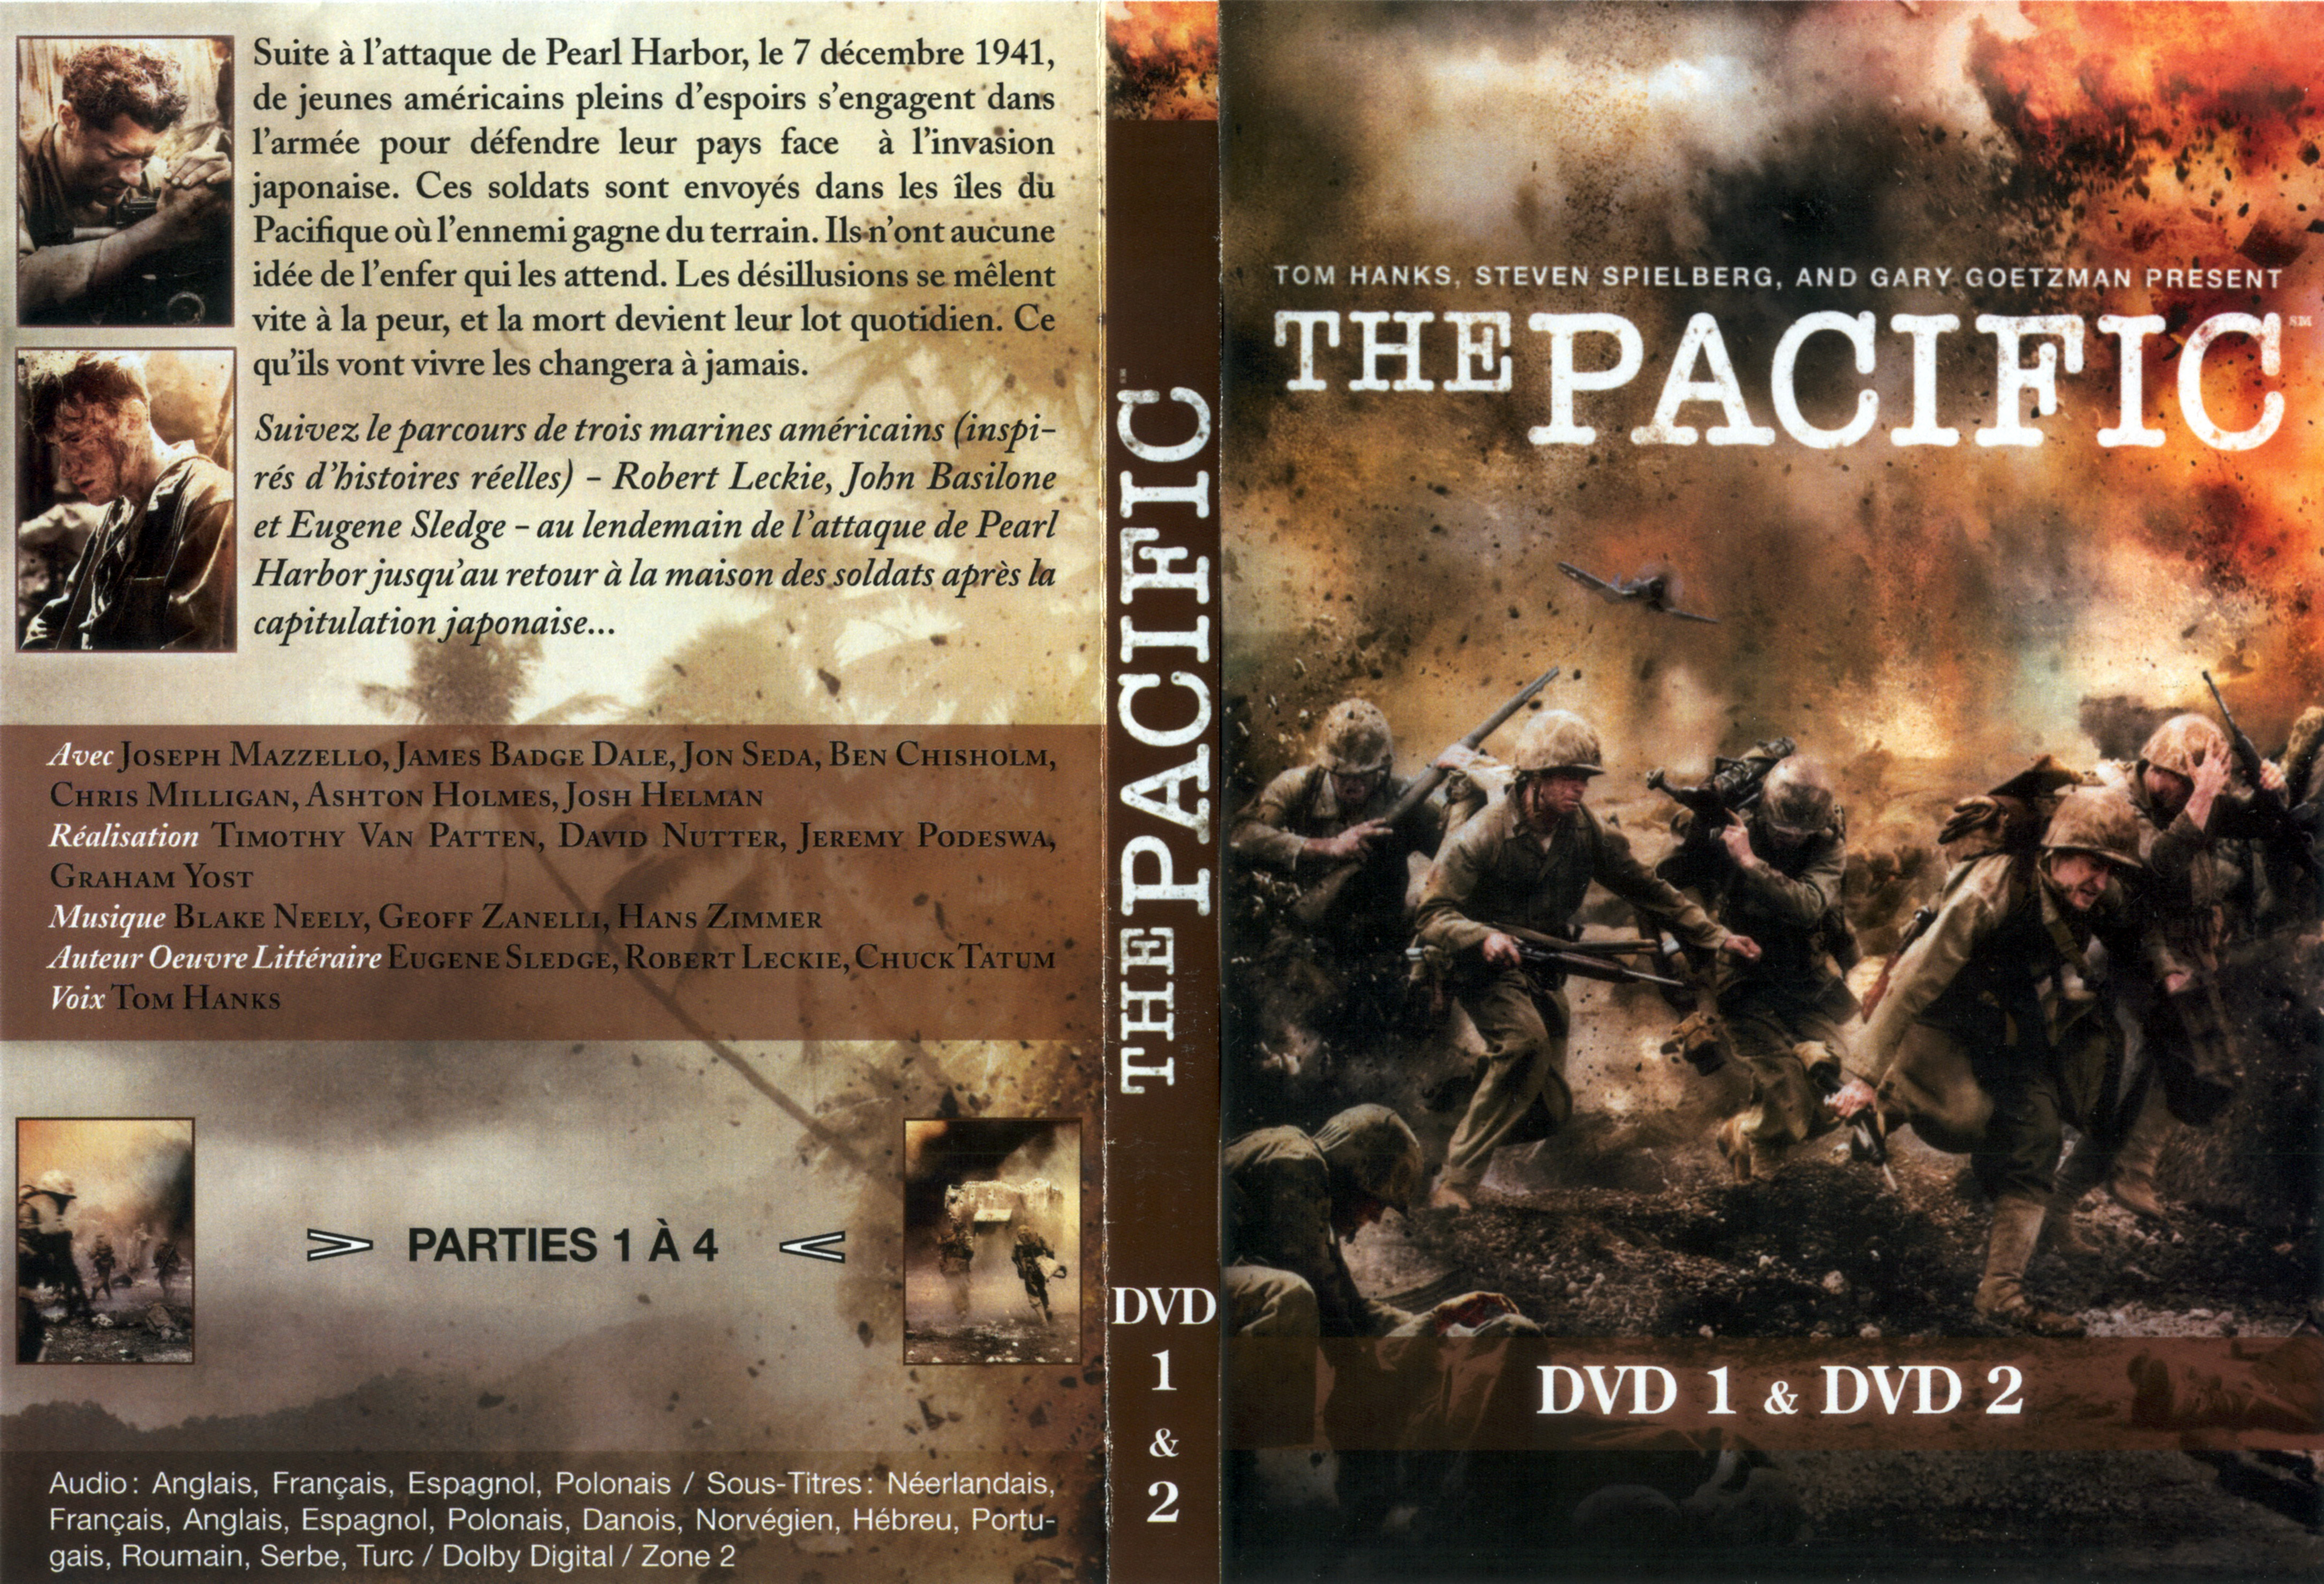 Jaquette DVD The Pacific DVD 1